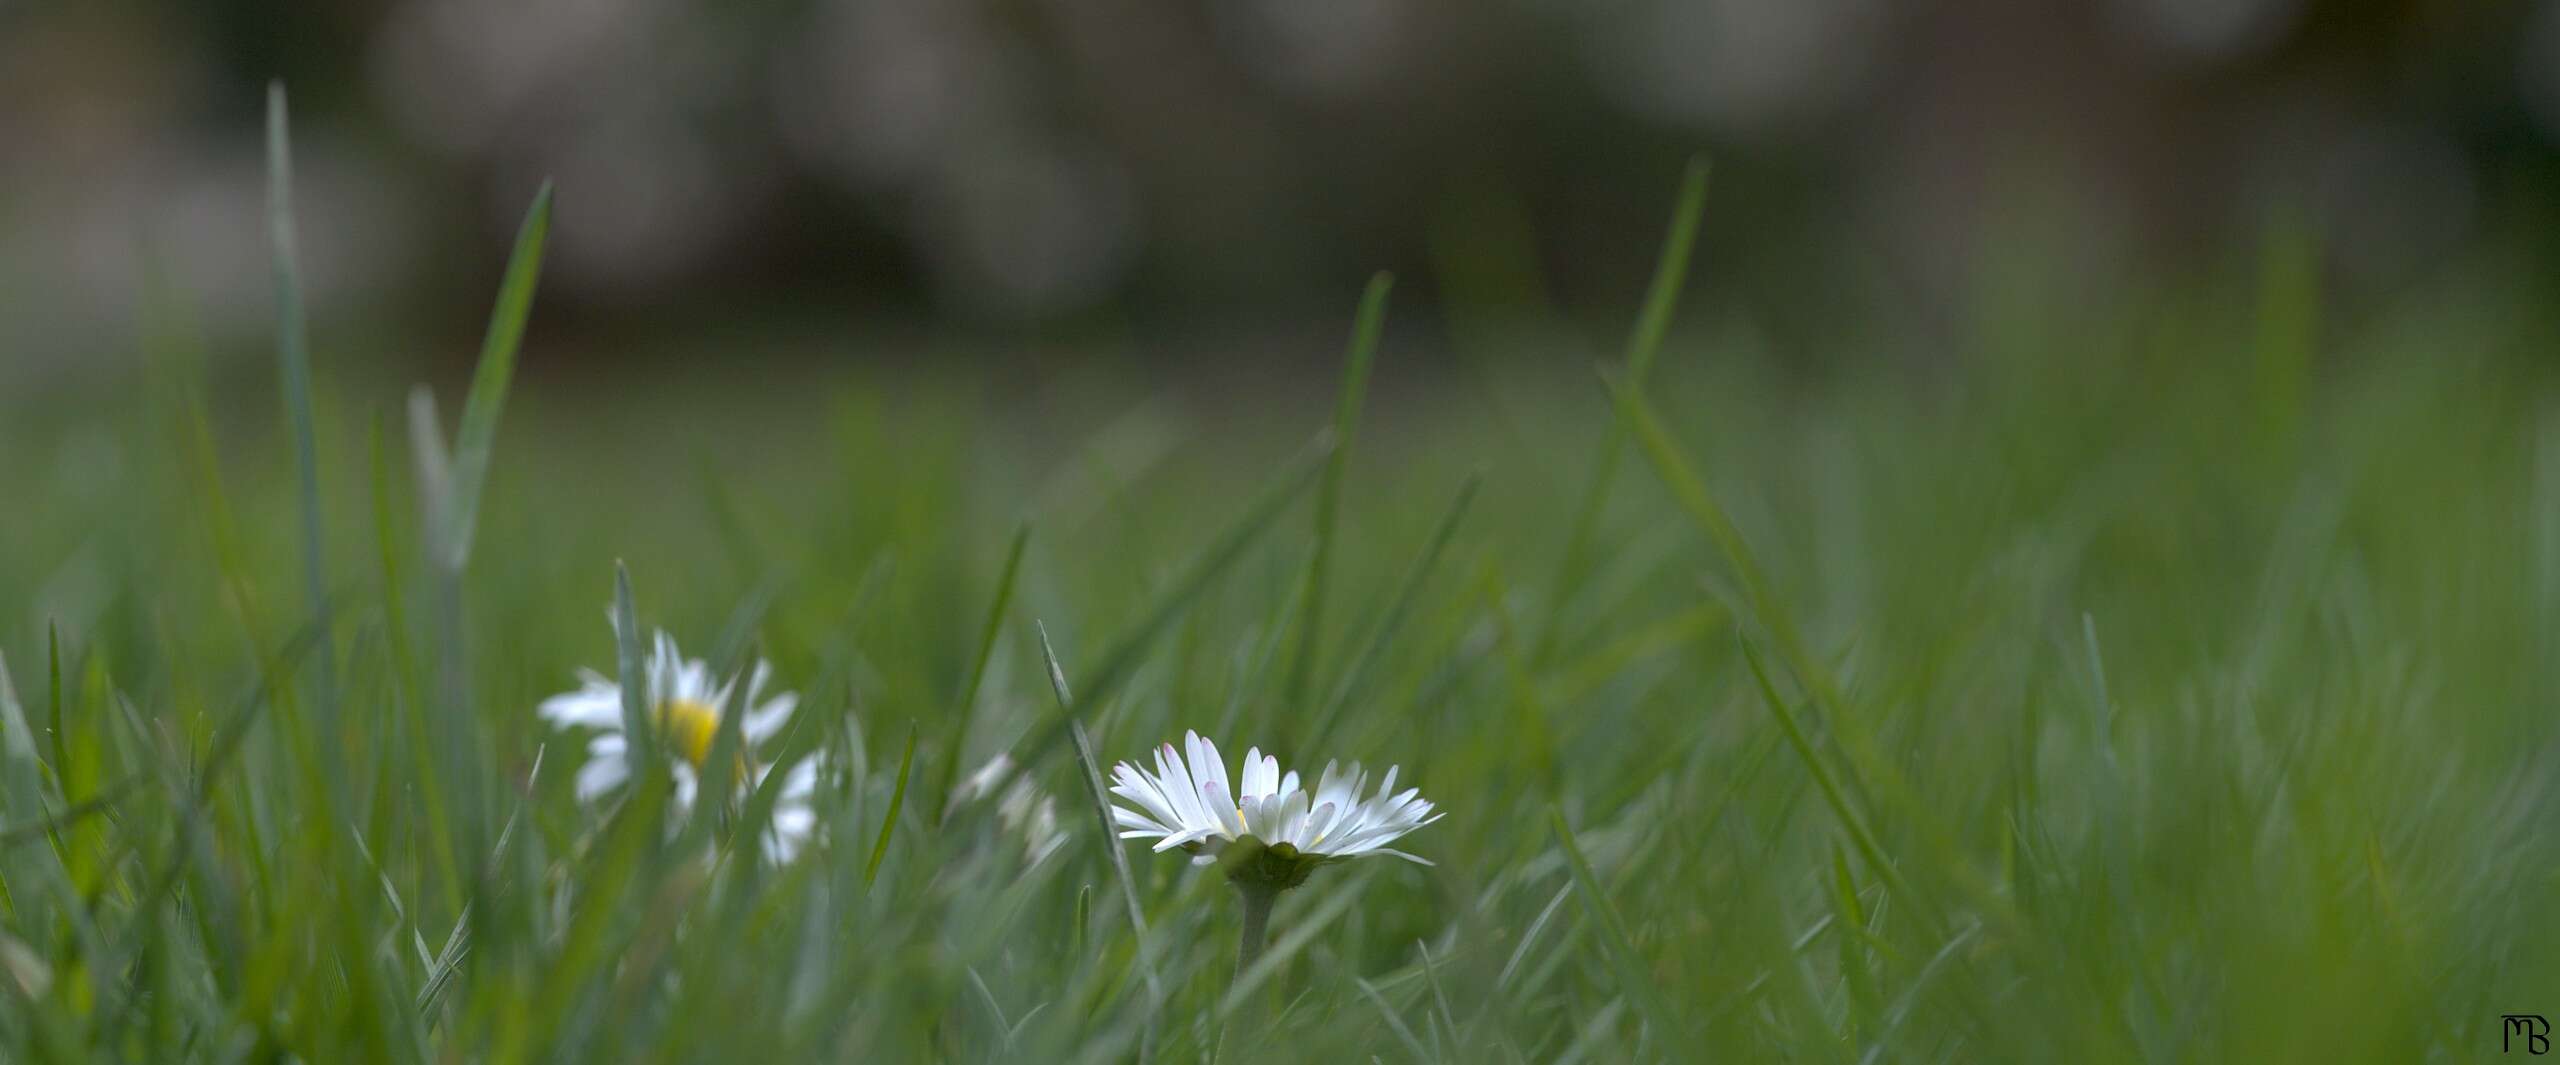 White flower peaking out of grass